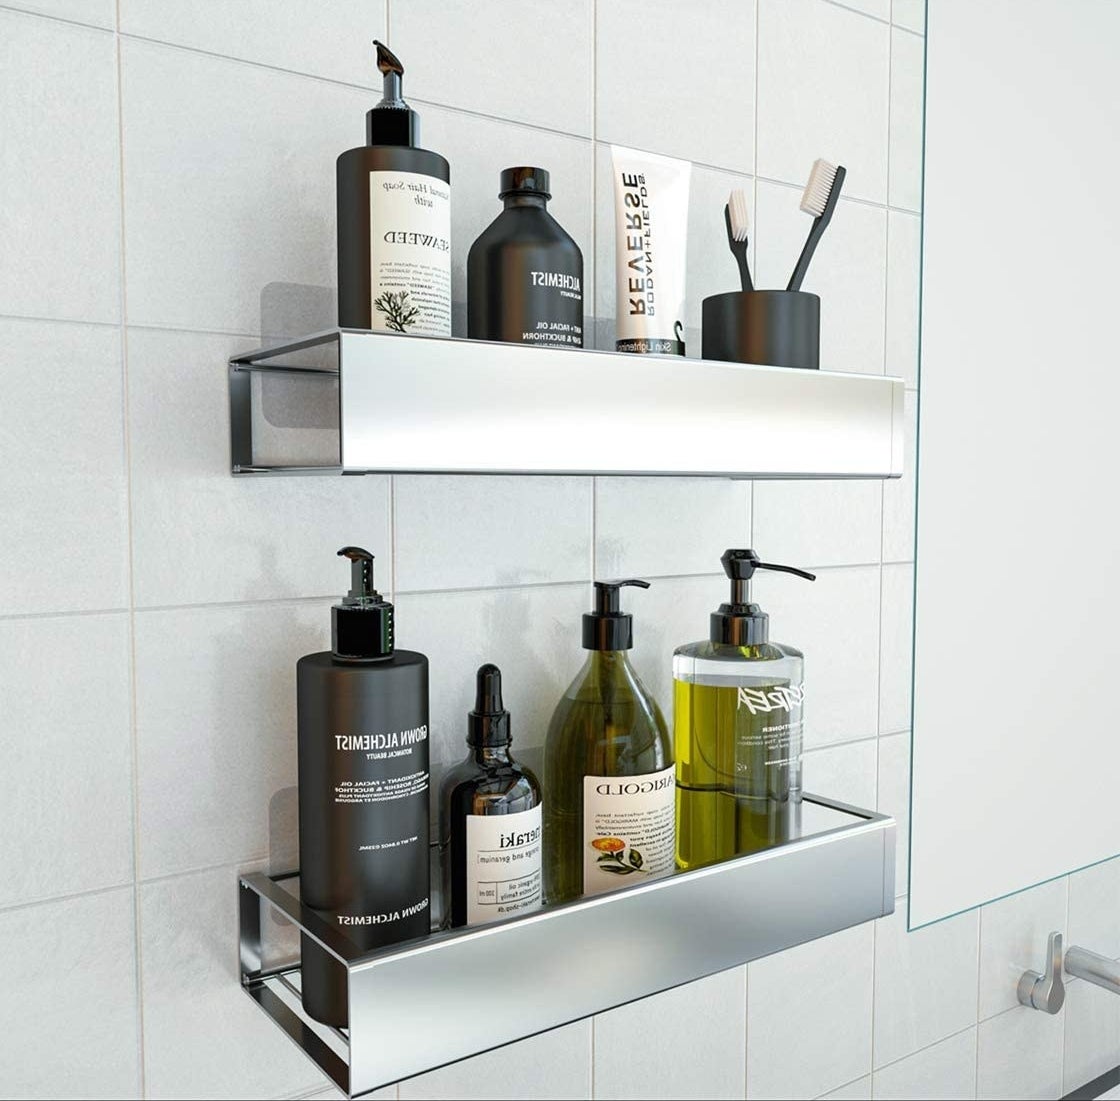 A pair of wall-mounted stainless steel shelves containing personal care products